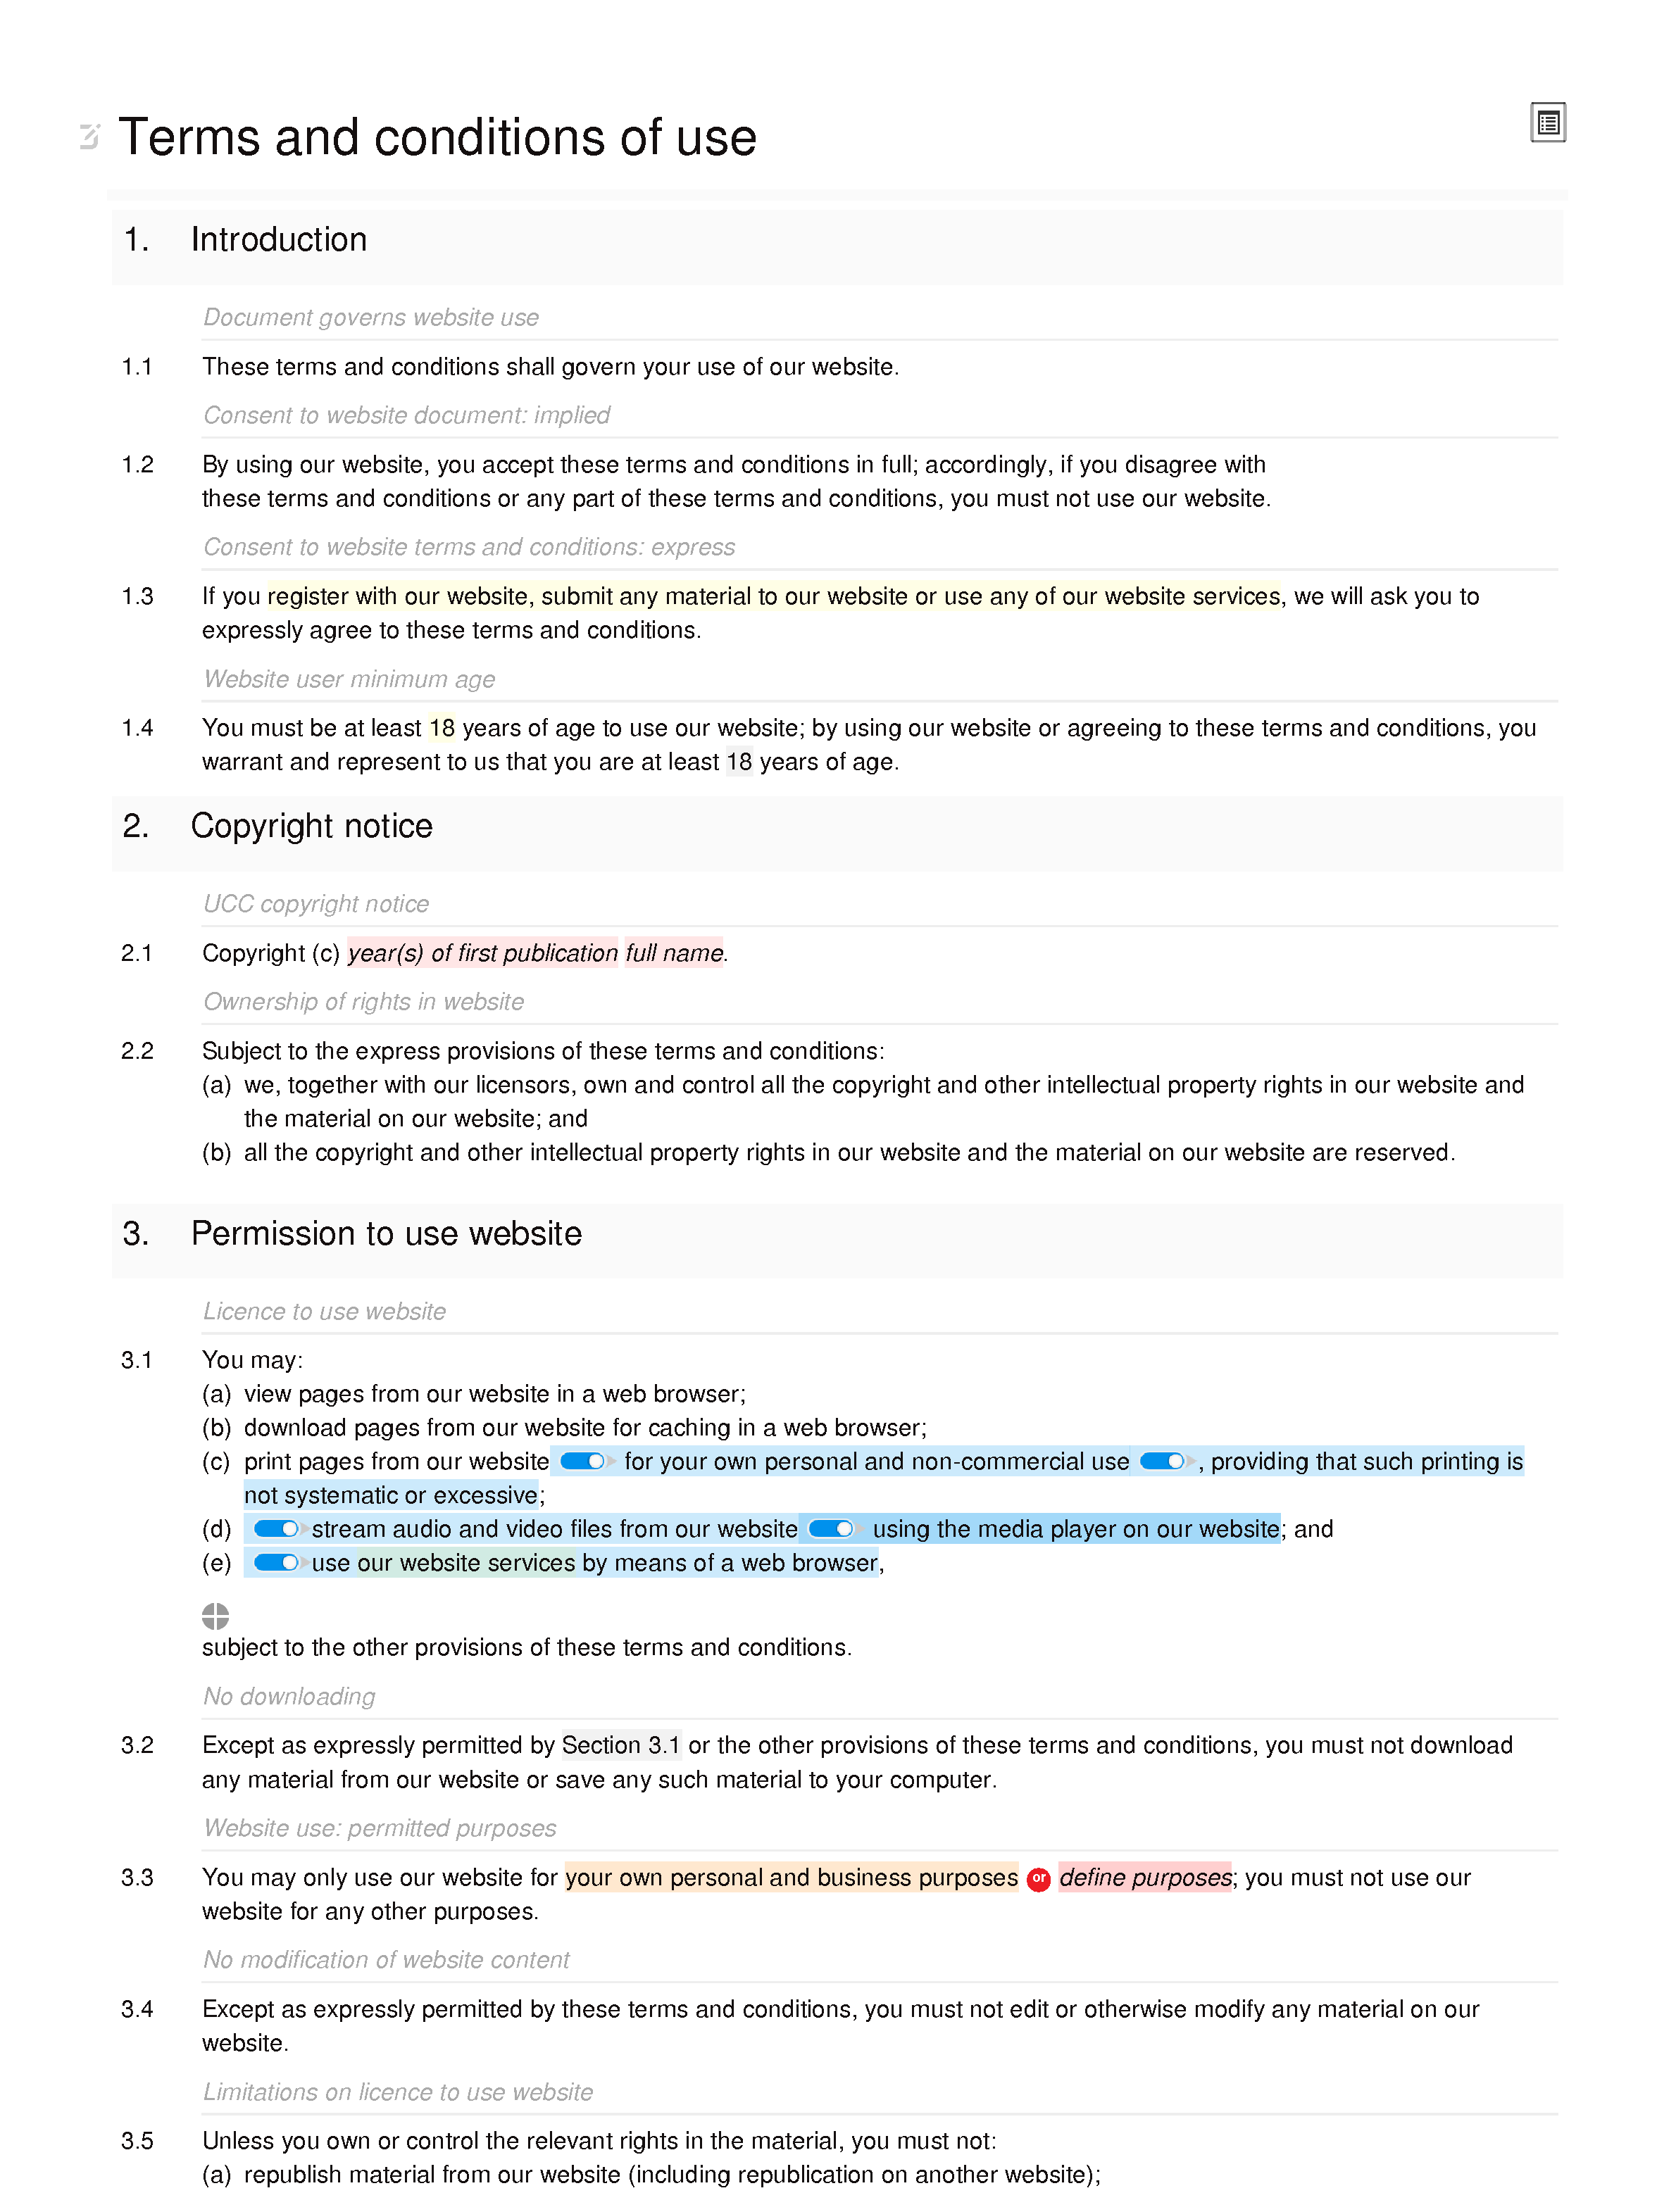 Competition website terms and conditions document editor preview